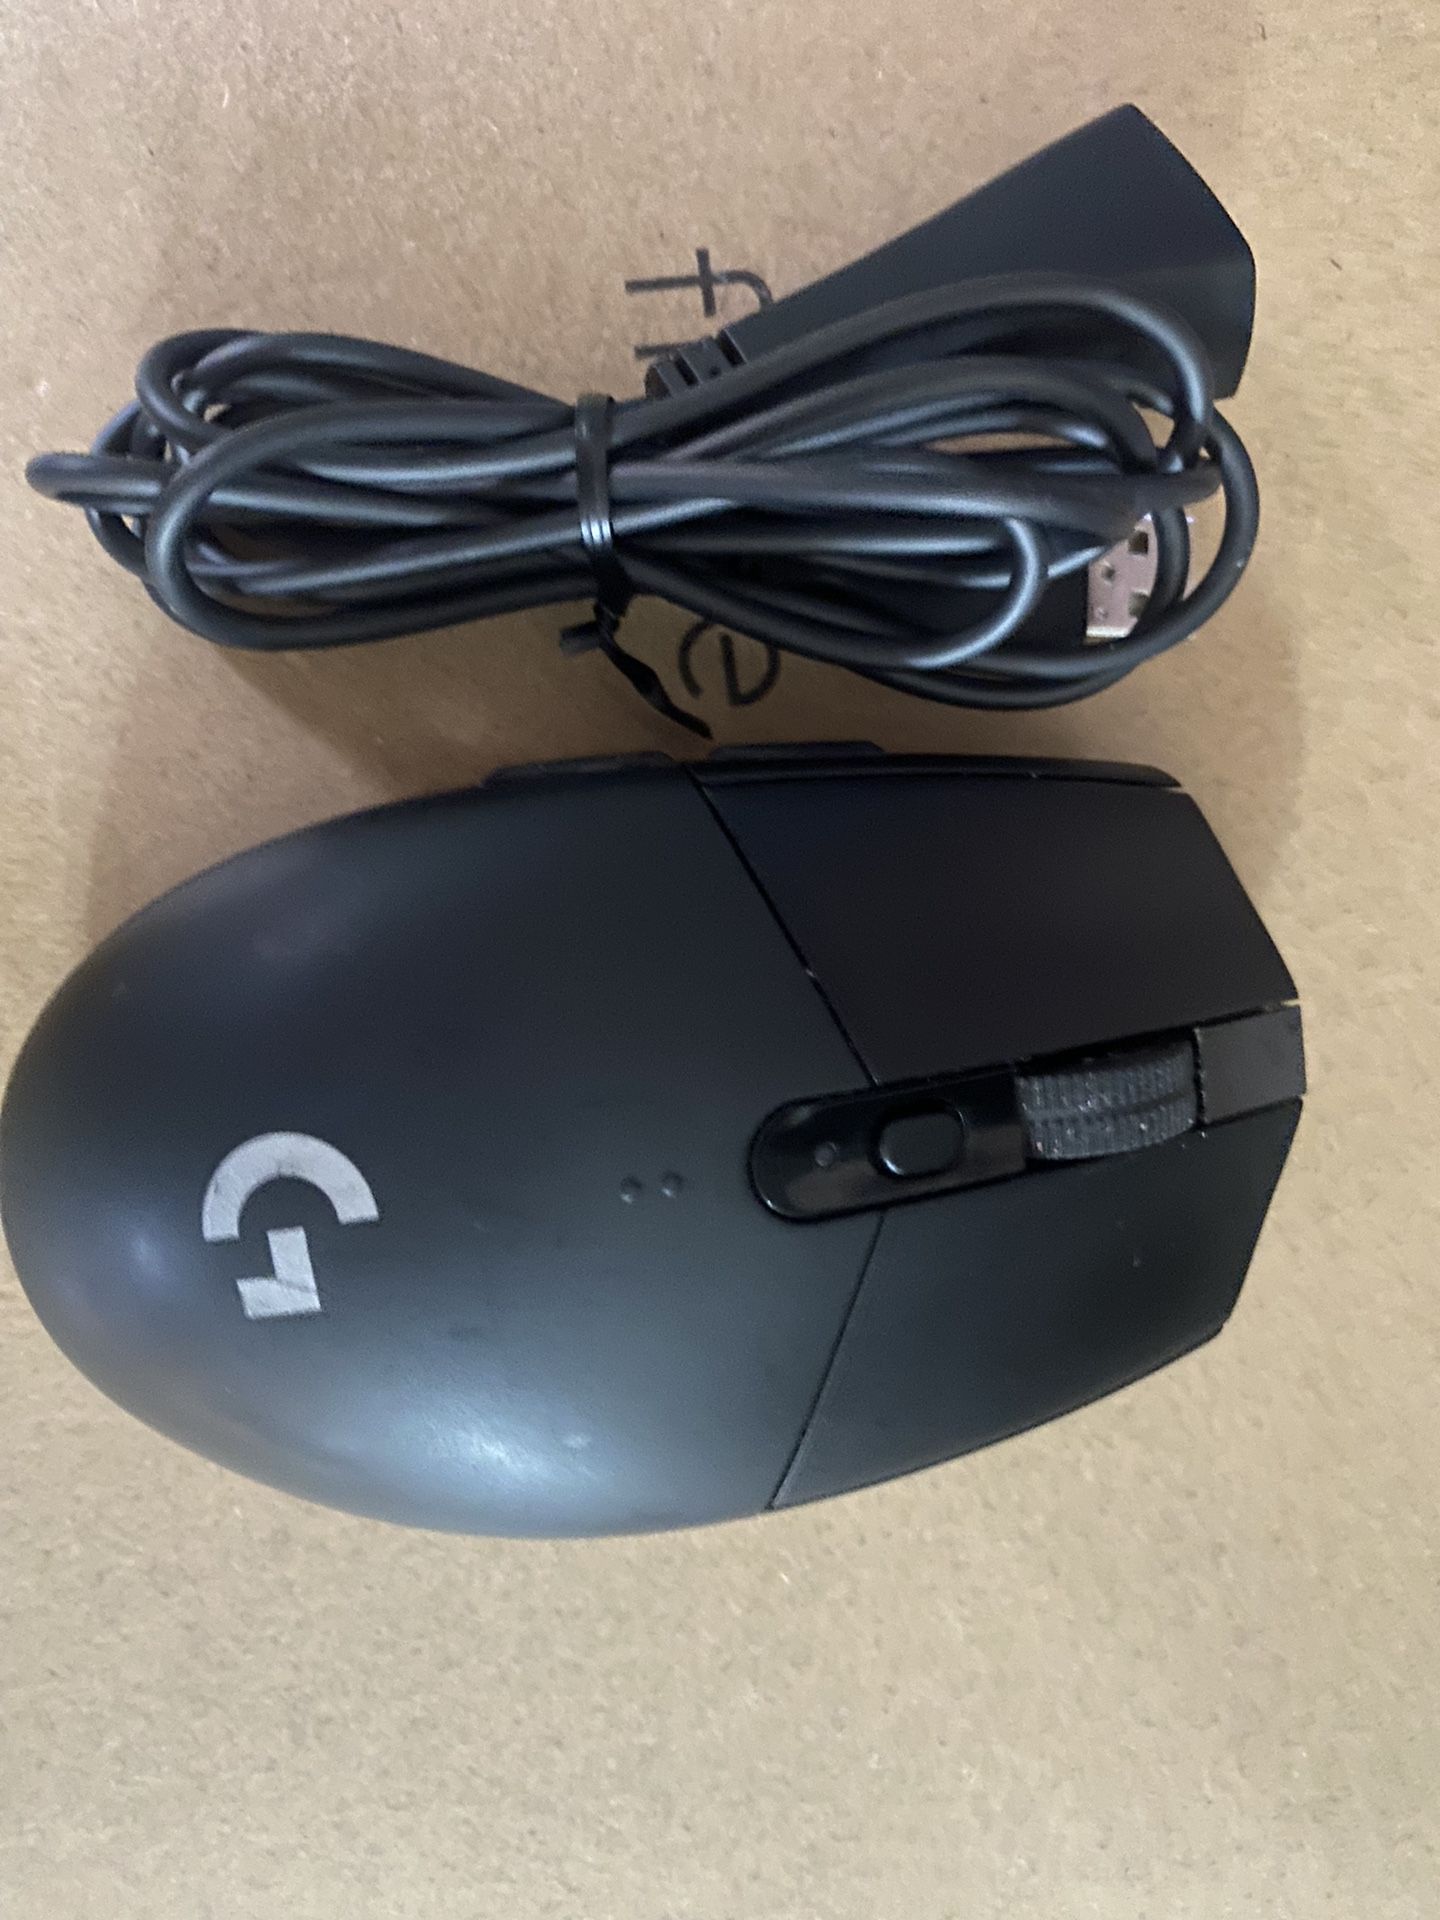 Logitech G305 Wireless Gaming Mouse (NO USB)